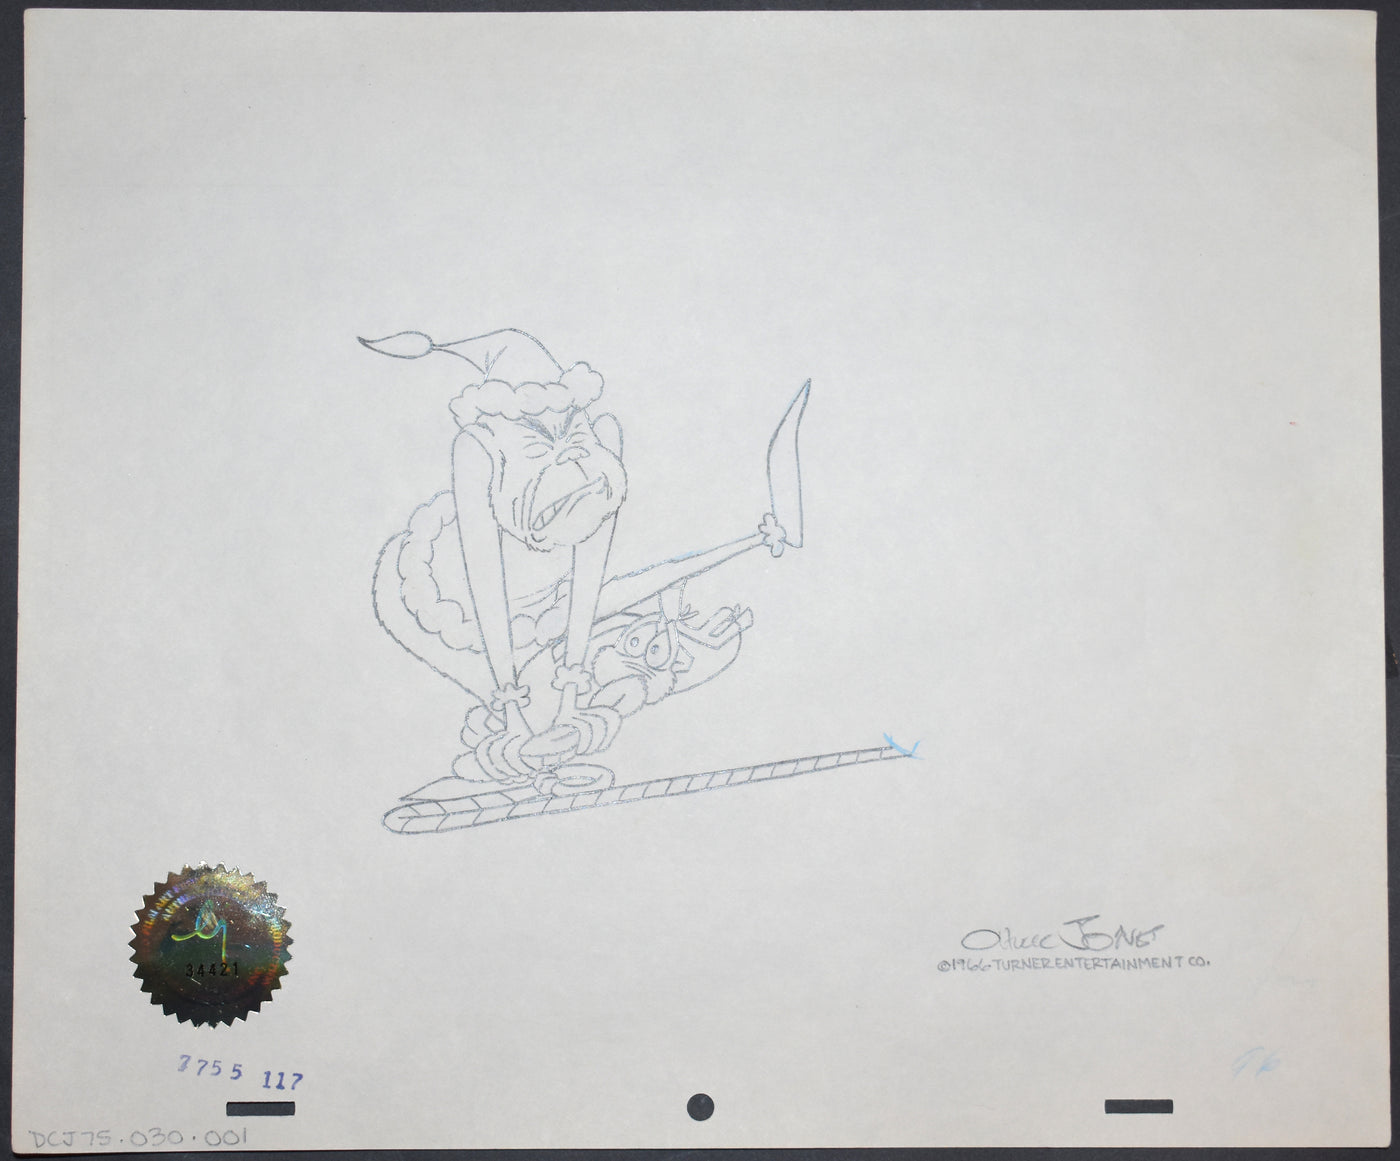 Original Chuck Jones Production Drawing of The Grinch and Max from How the Grinch Stole Christmas, Signed by Chuck Jones